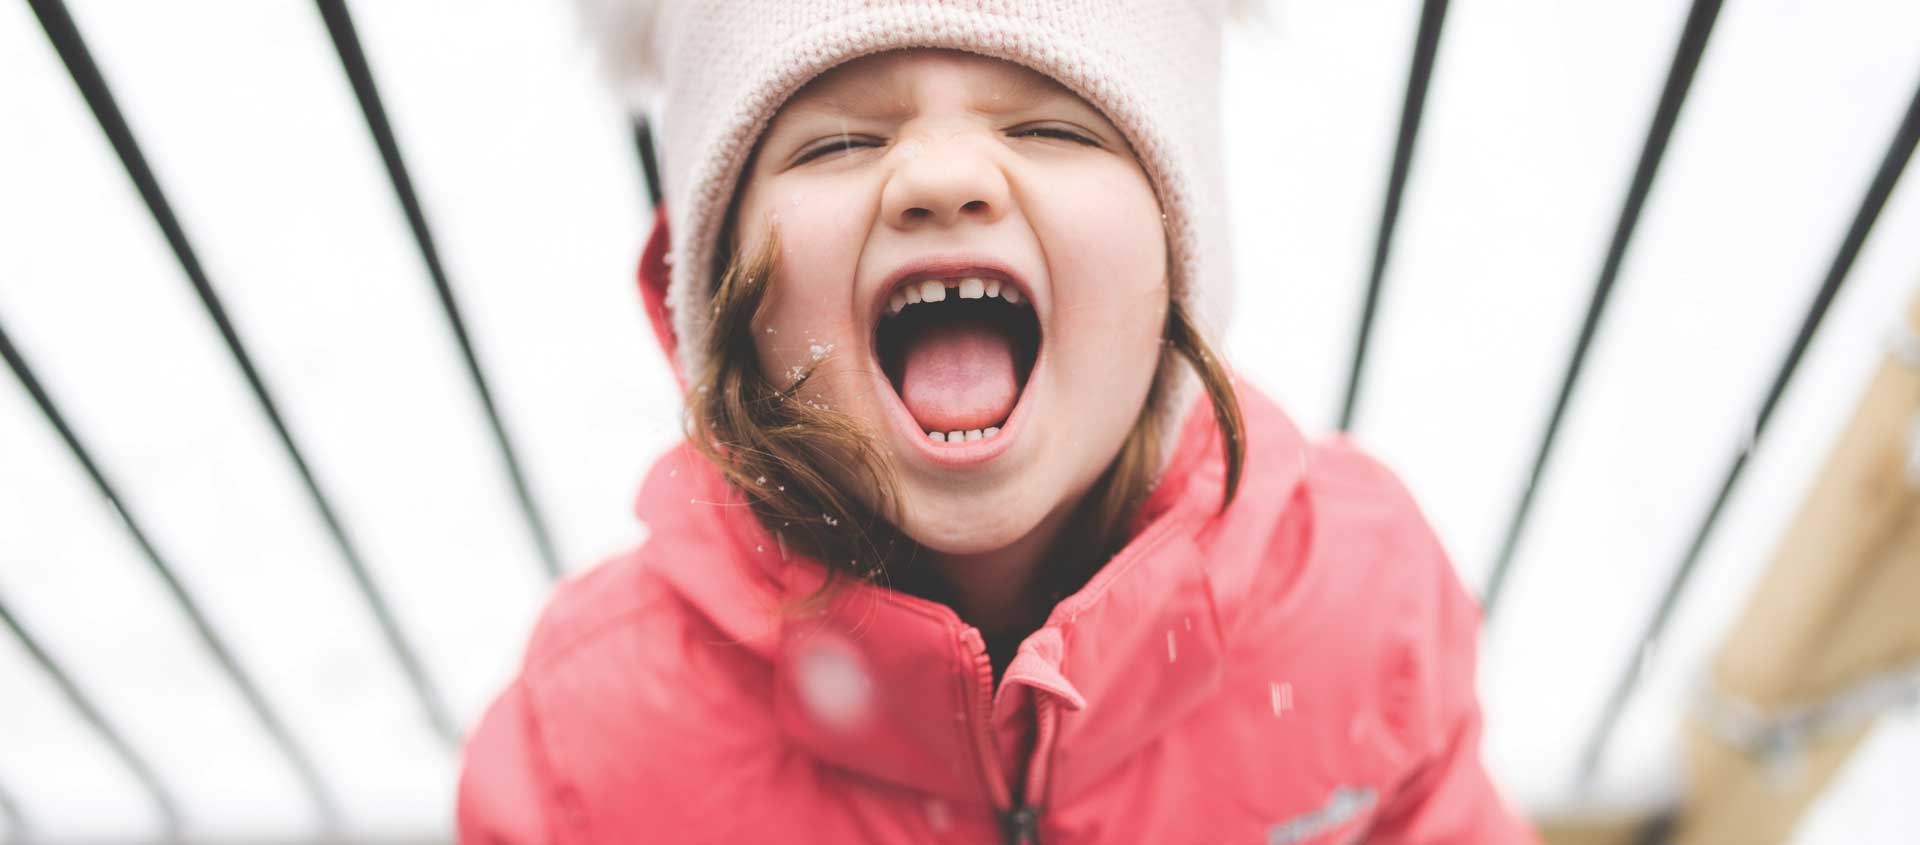 A child in a snowy setting has a tantrum